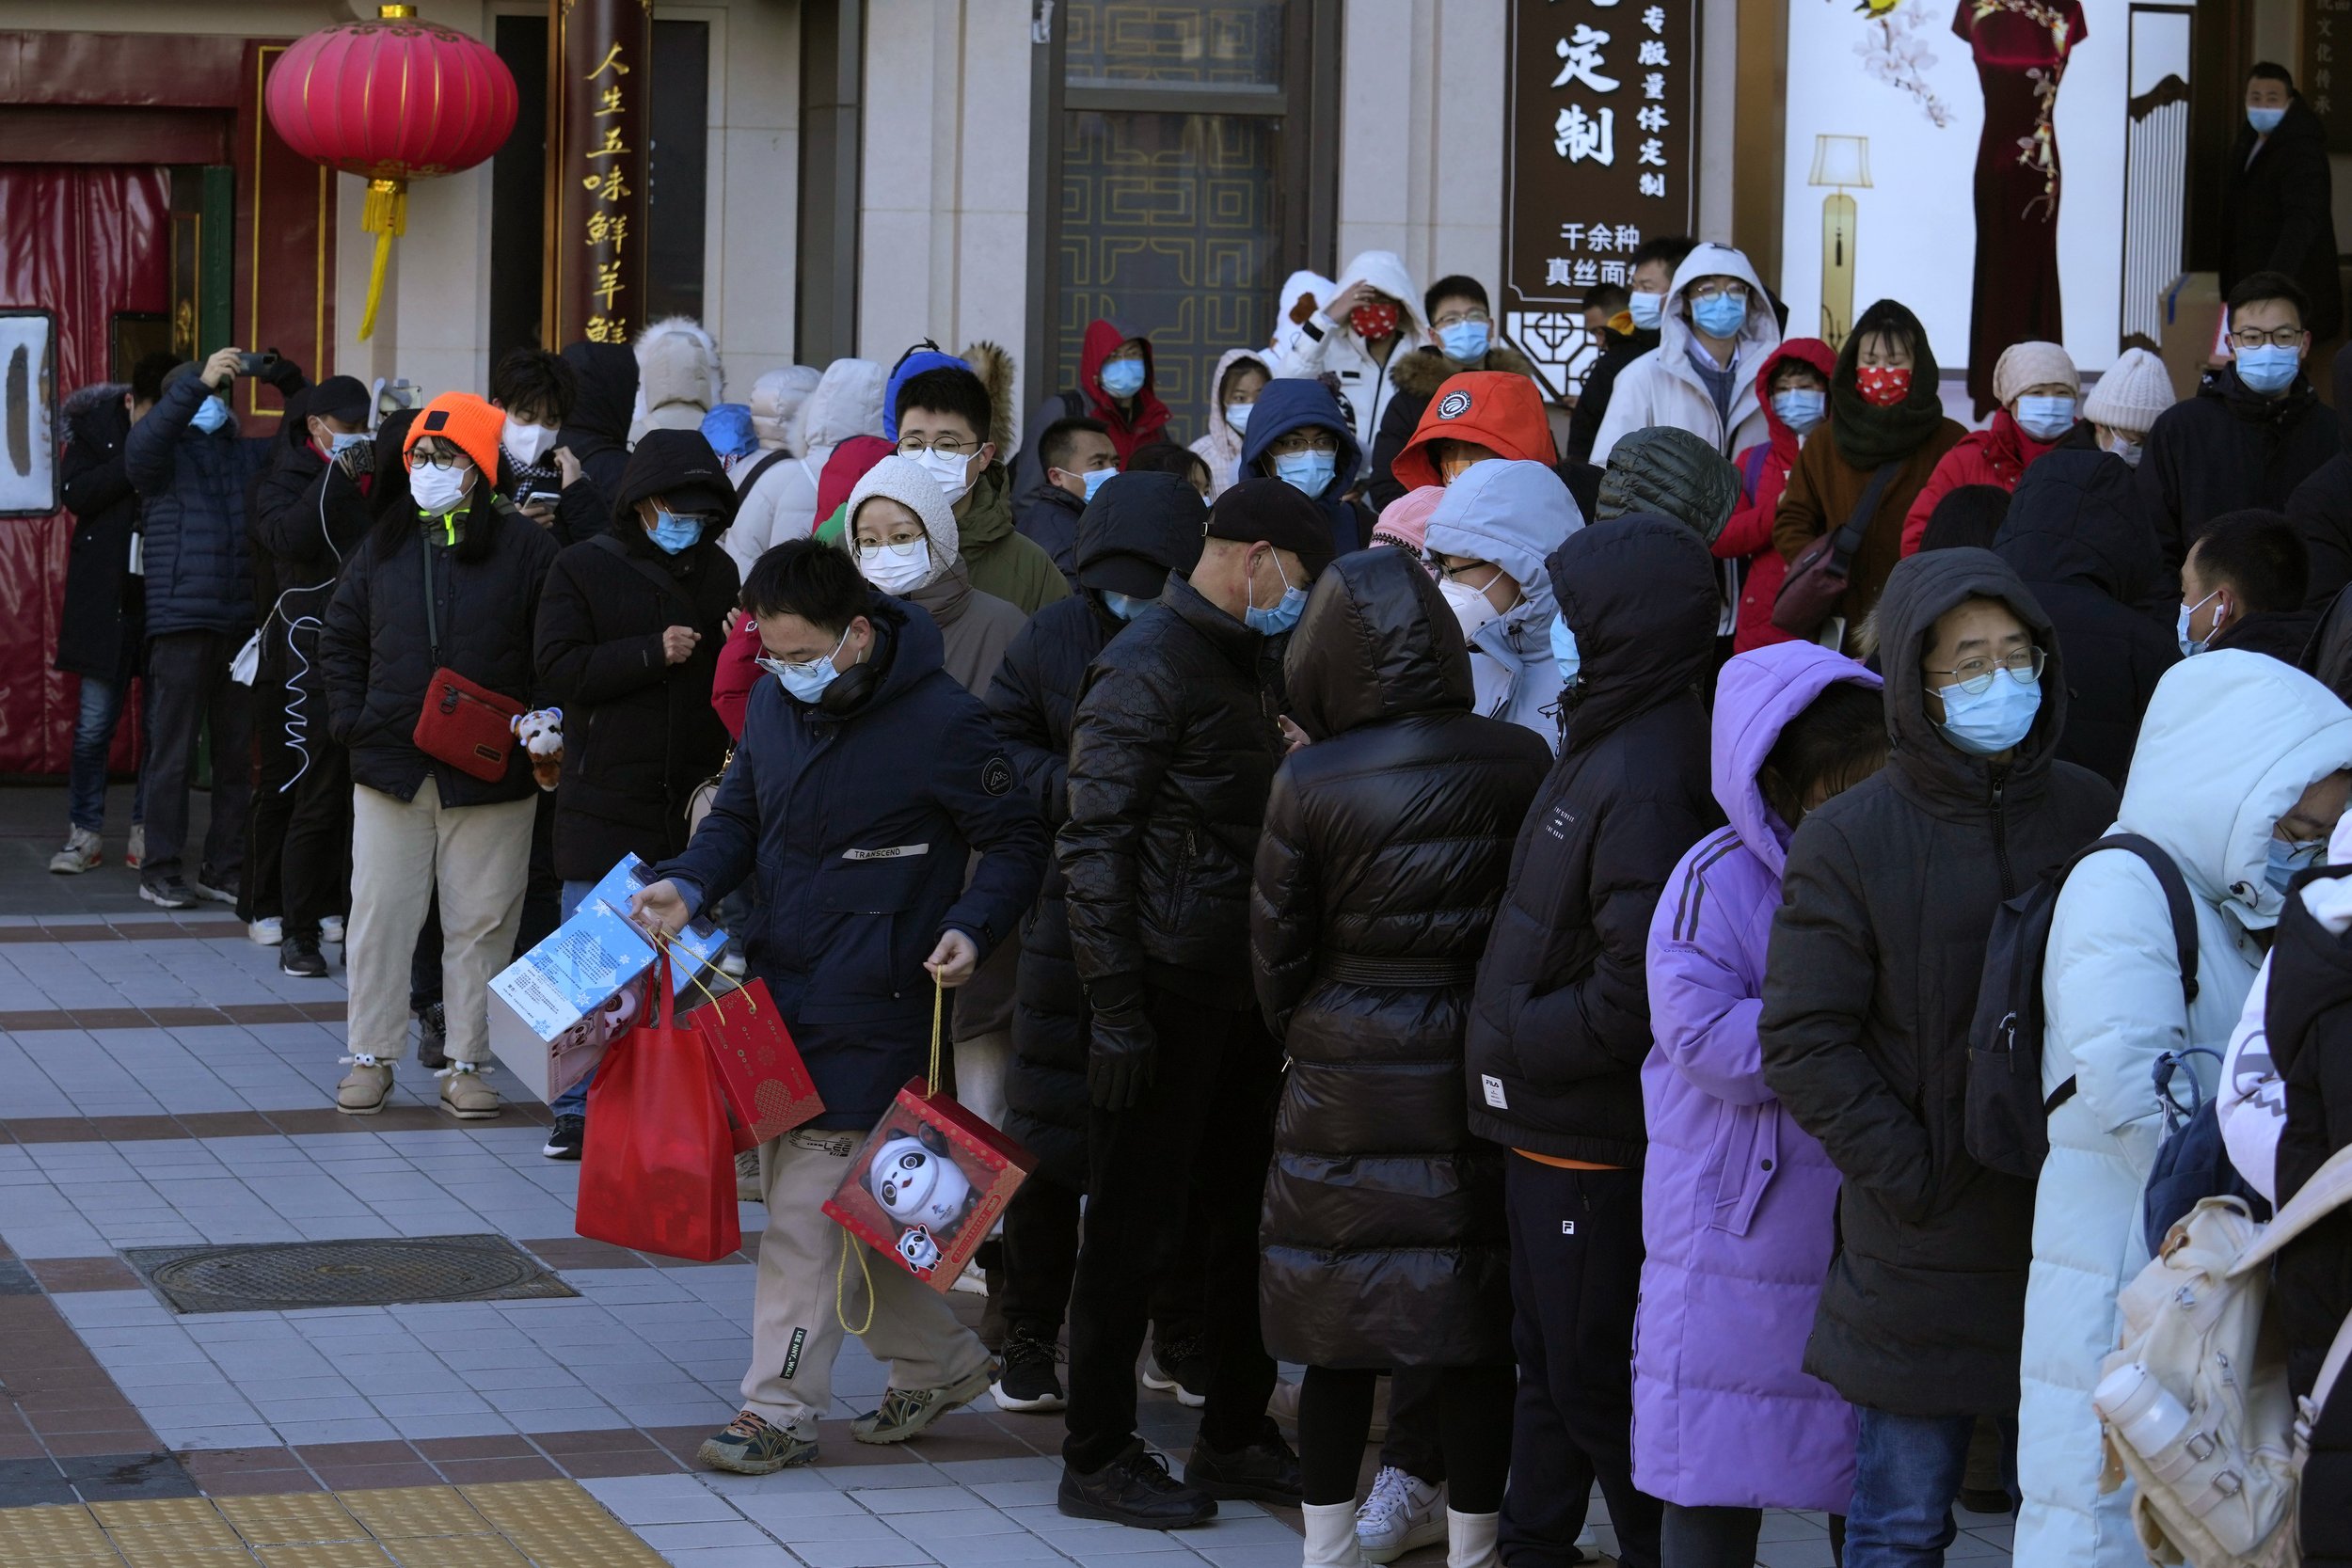  A resident carries away his purchase of 2022 Winter Olympics memorabilia including  mascot Bing Dwen Dwen after lining up outside a store in Beijing, China, Friday, Feb. 4, 2022. (AP Photo/Ng Han Guan) 